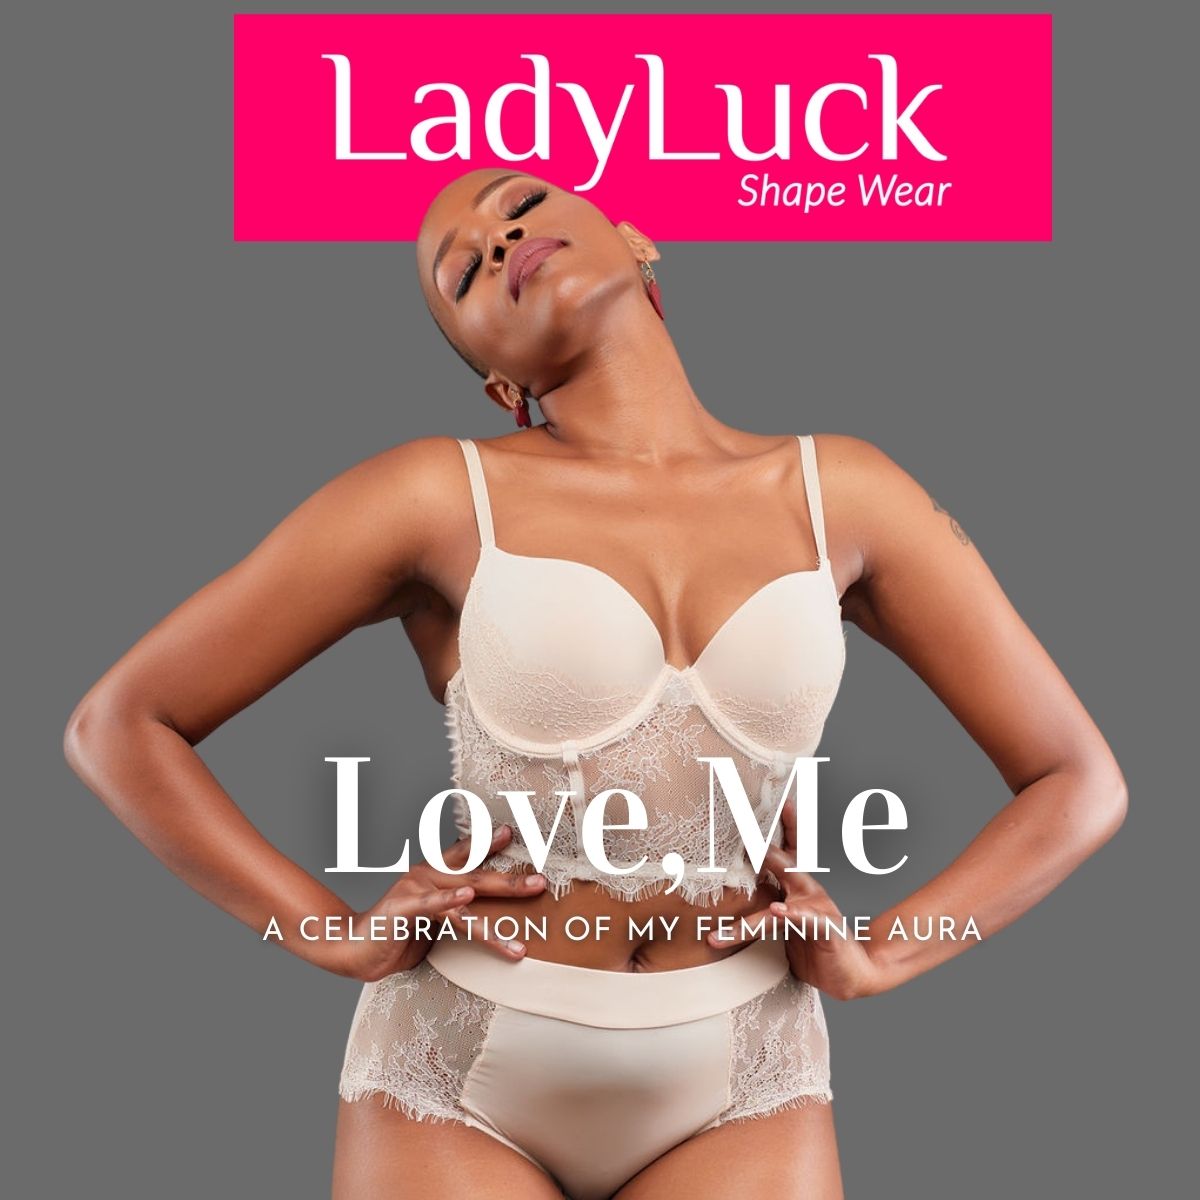 The Lady Luck “LOVE, ME” collection - Galleria Shopping Mall